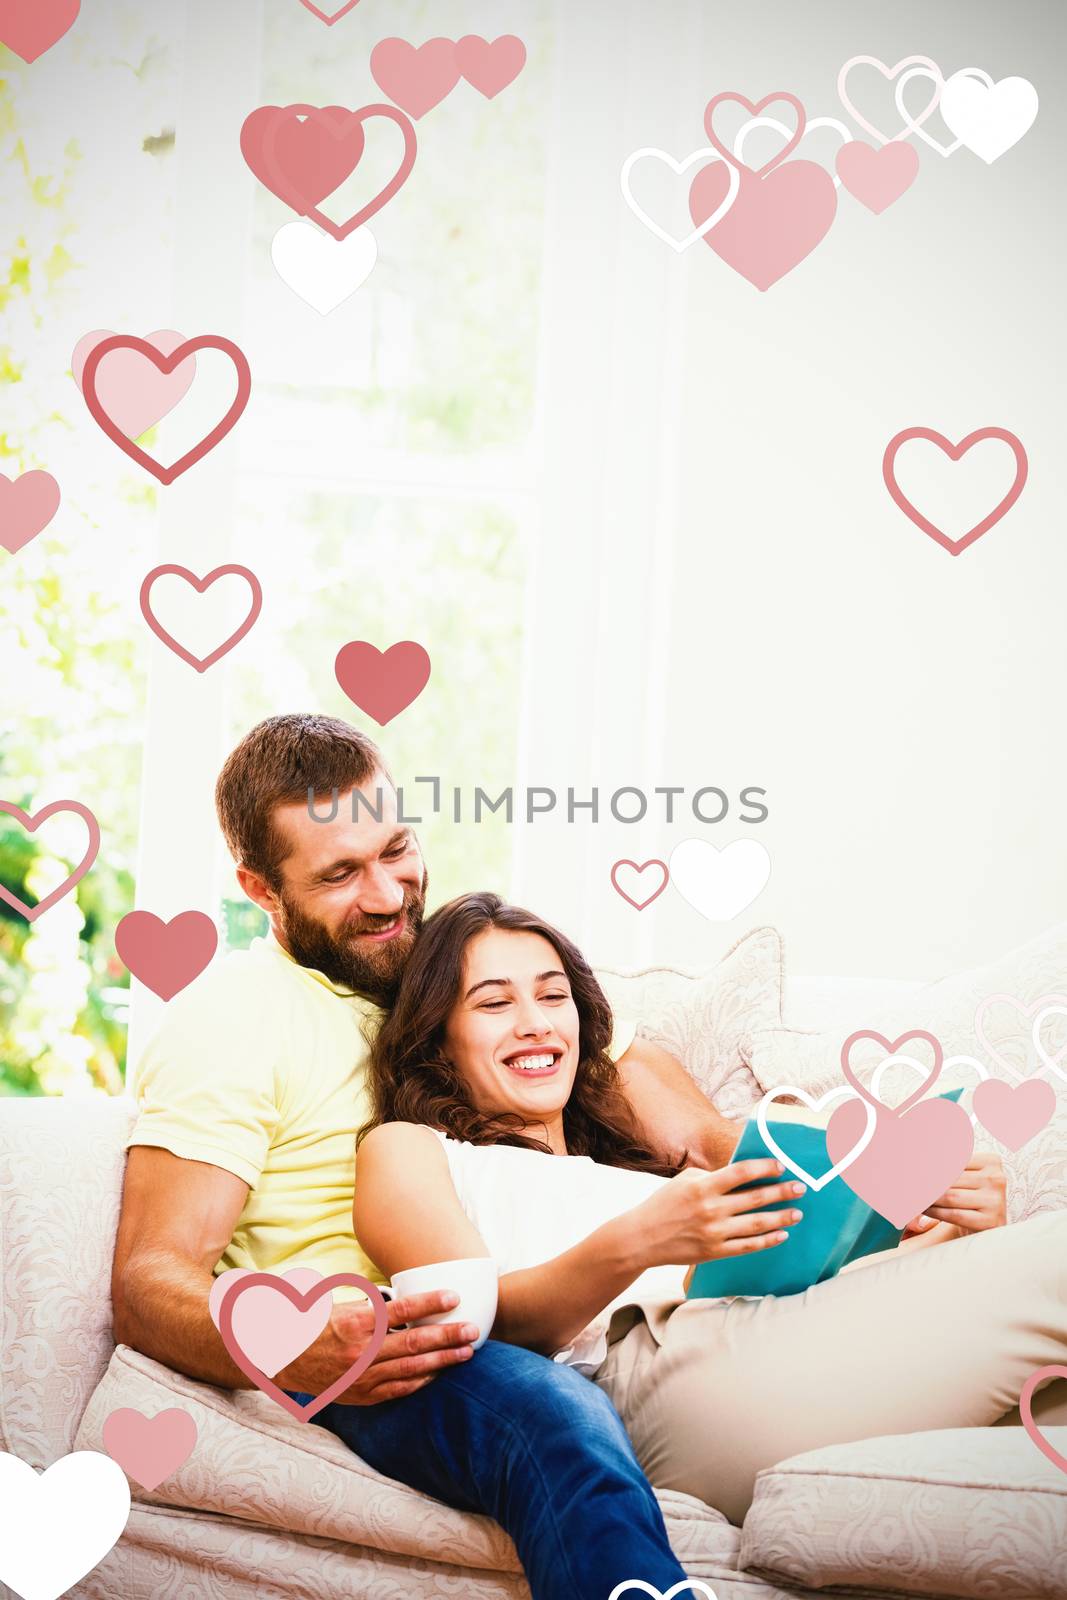 Valentines heart design against man holding a cup of coffee while woman reading book